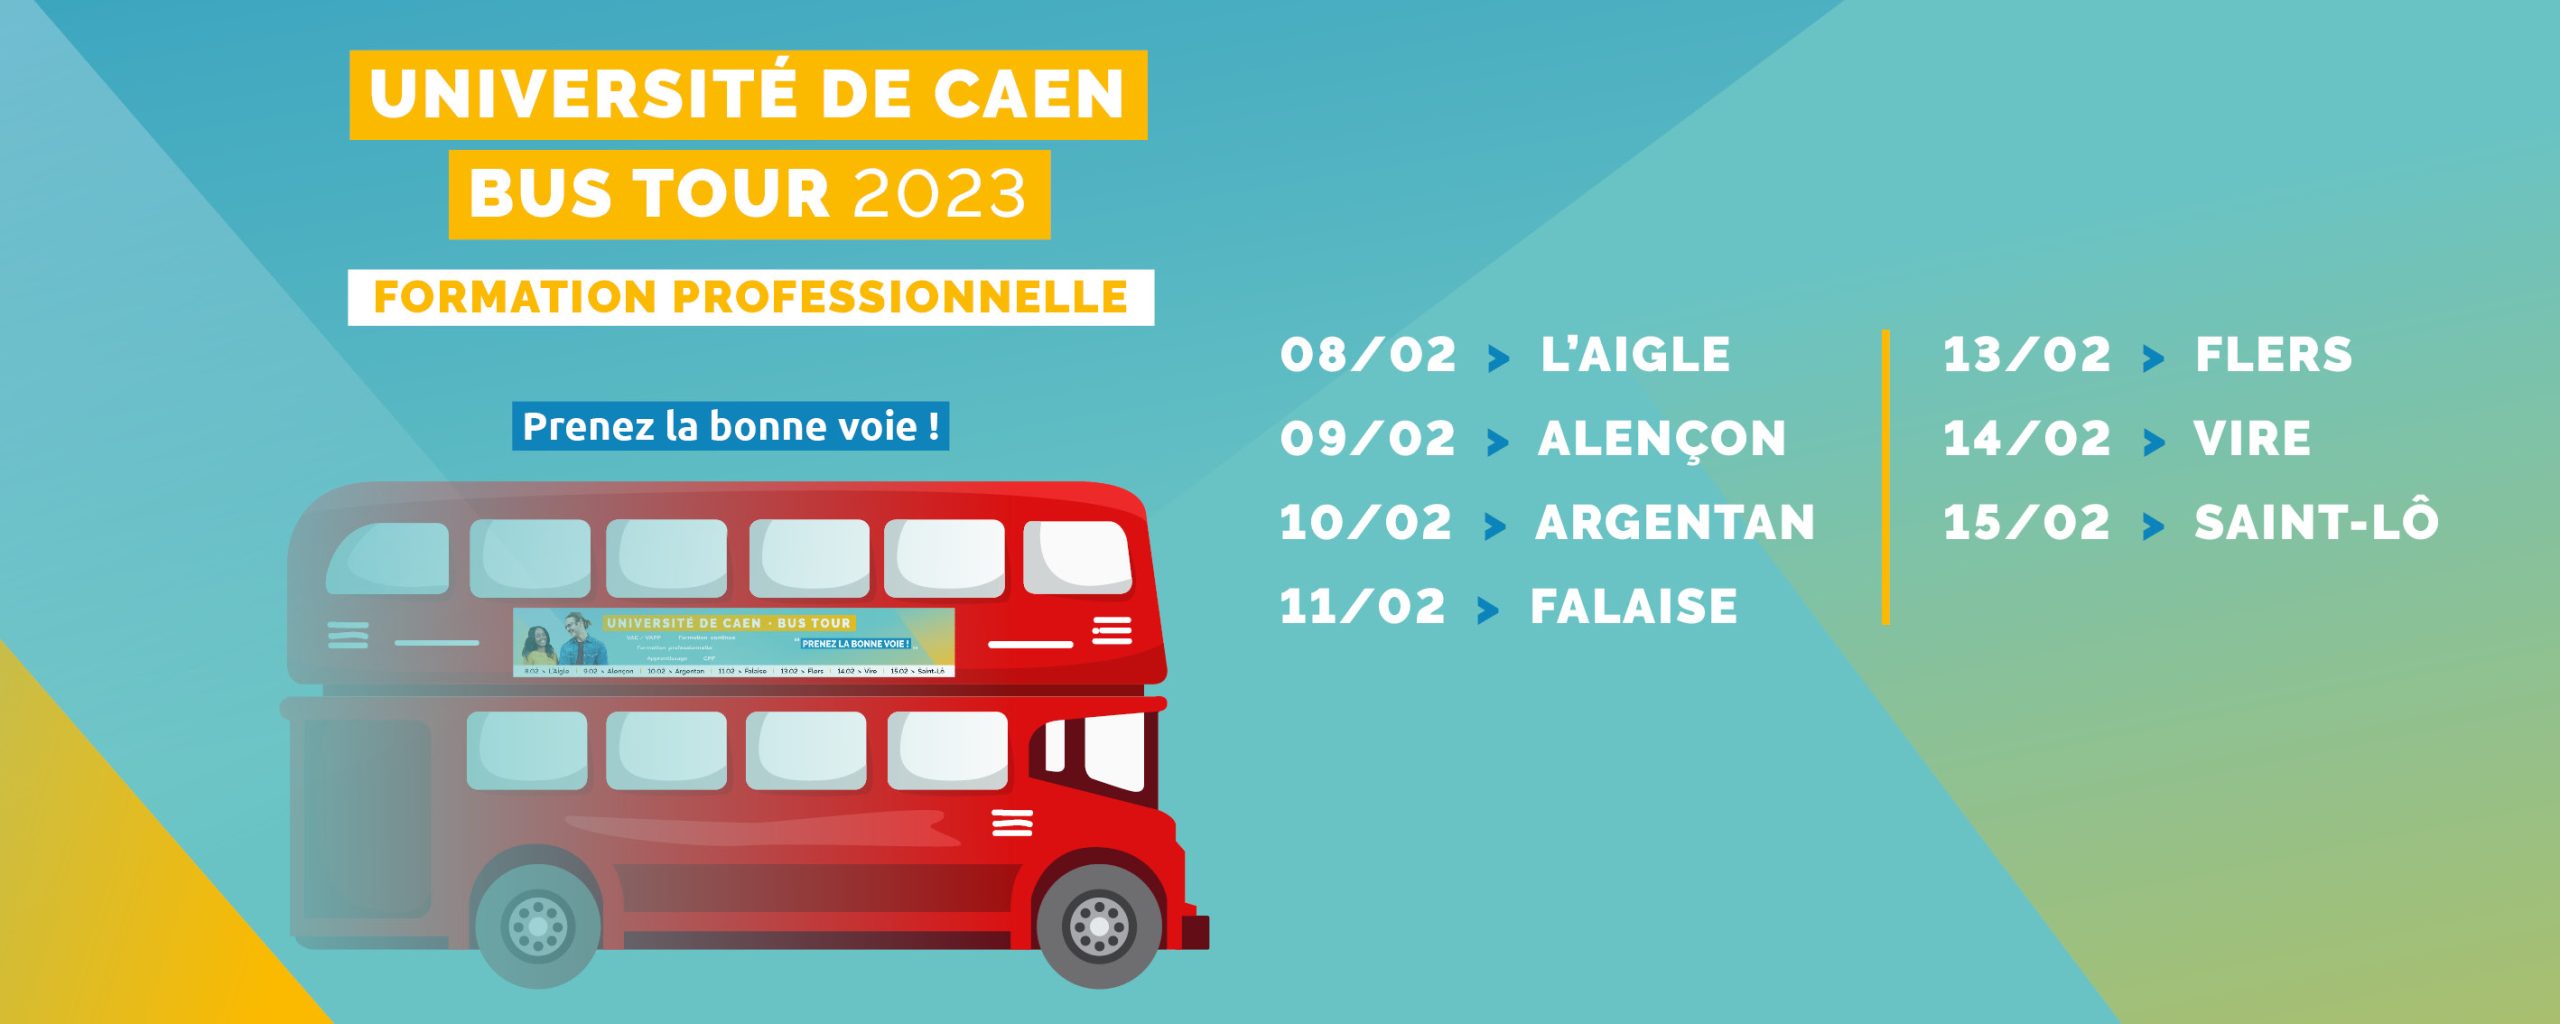 You are currently viewing Le Bus Tour Normandie 2023 formation professionnelle